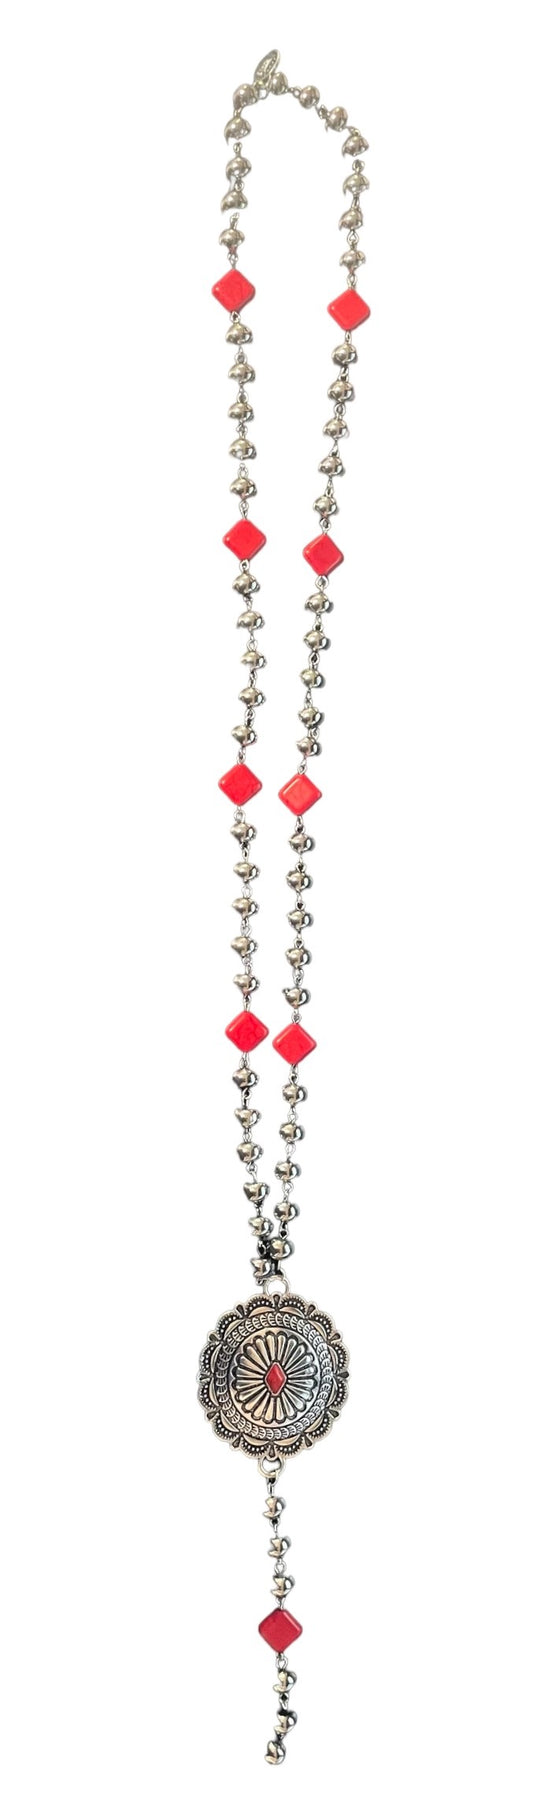 West & Co - Red Diamond Dolly Necklace